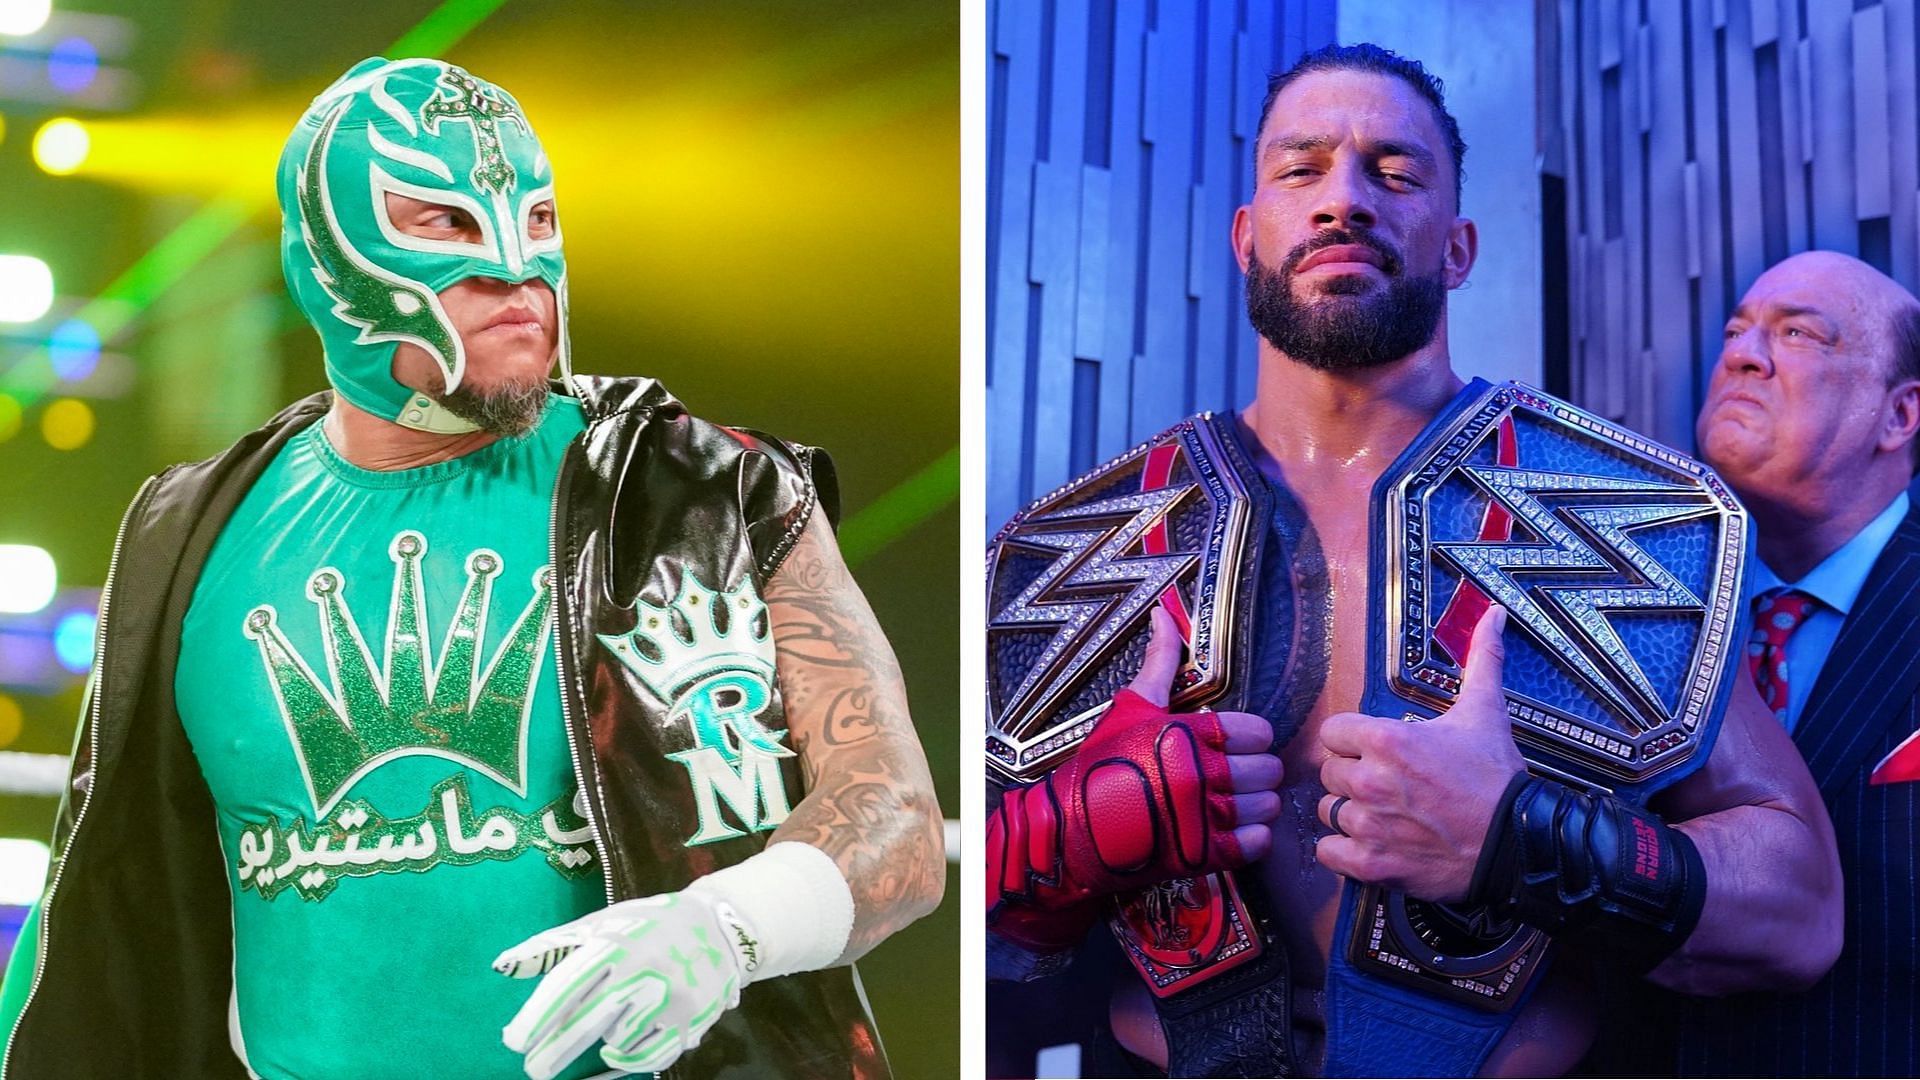 New programs are coming to WWE Network and Peacock this weekend